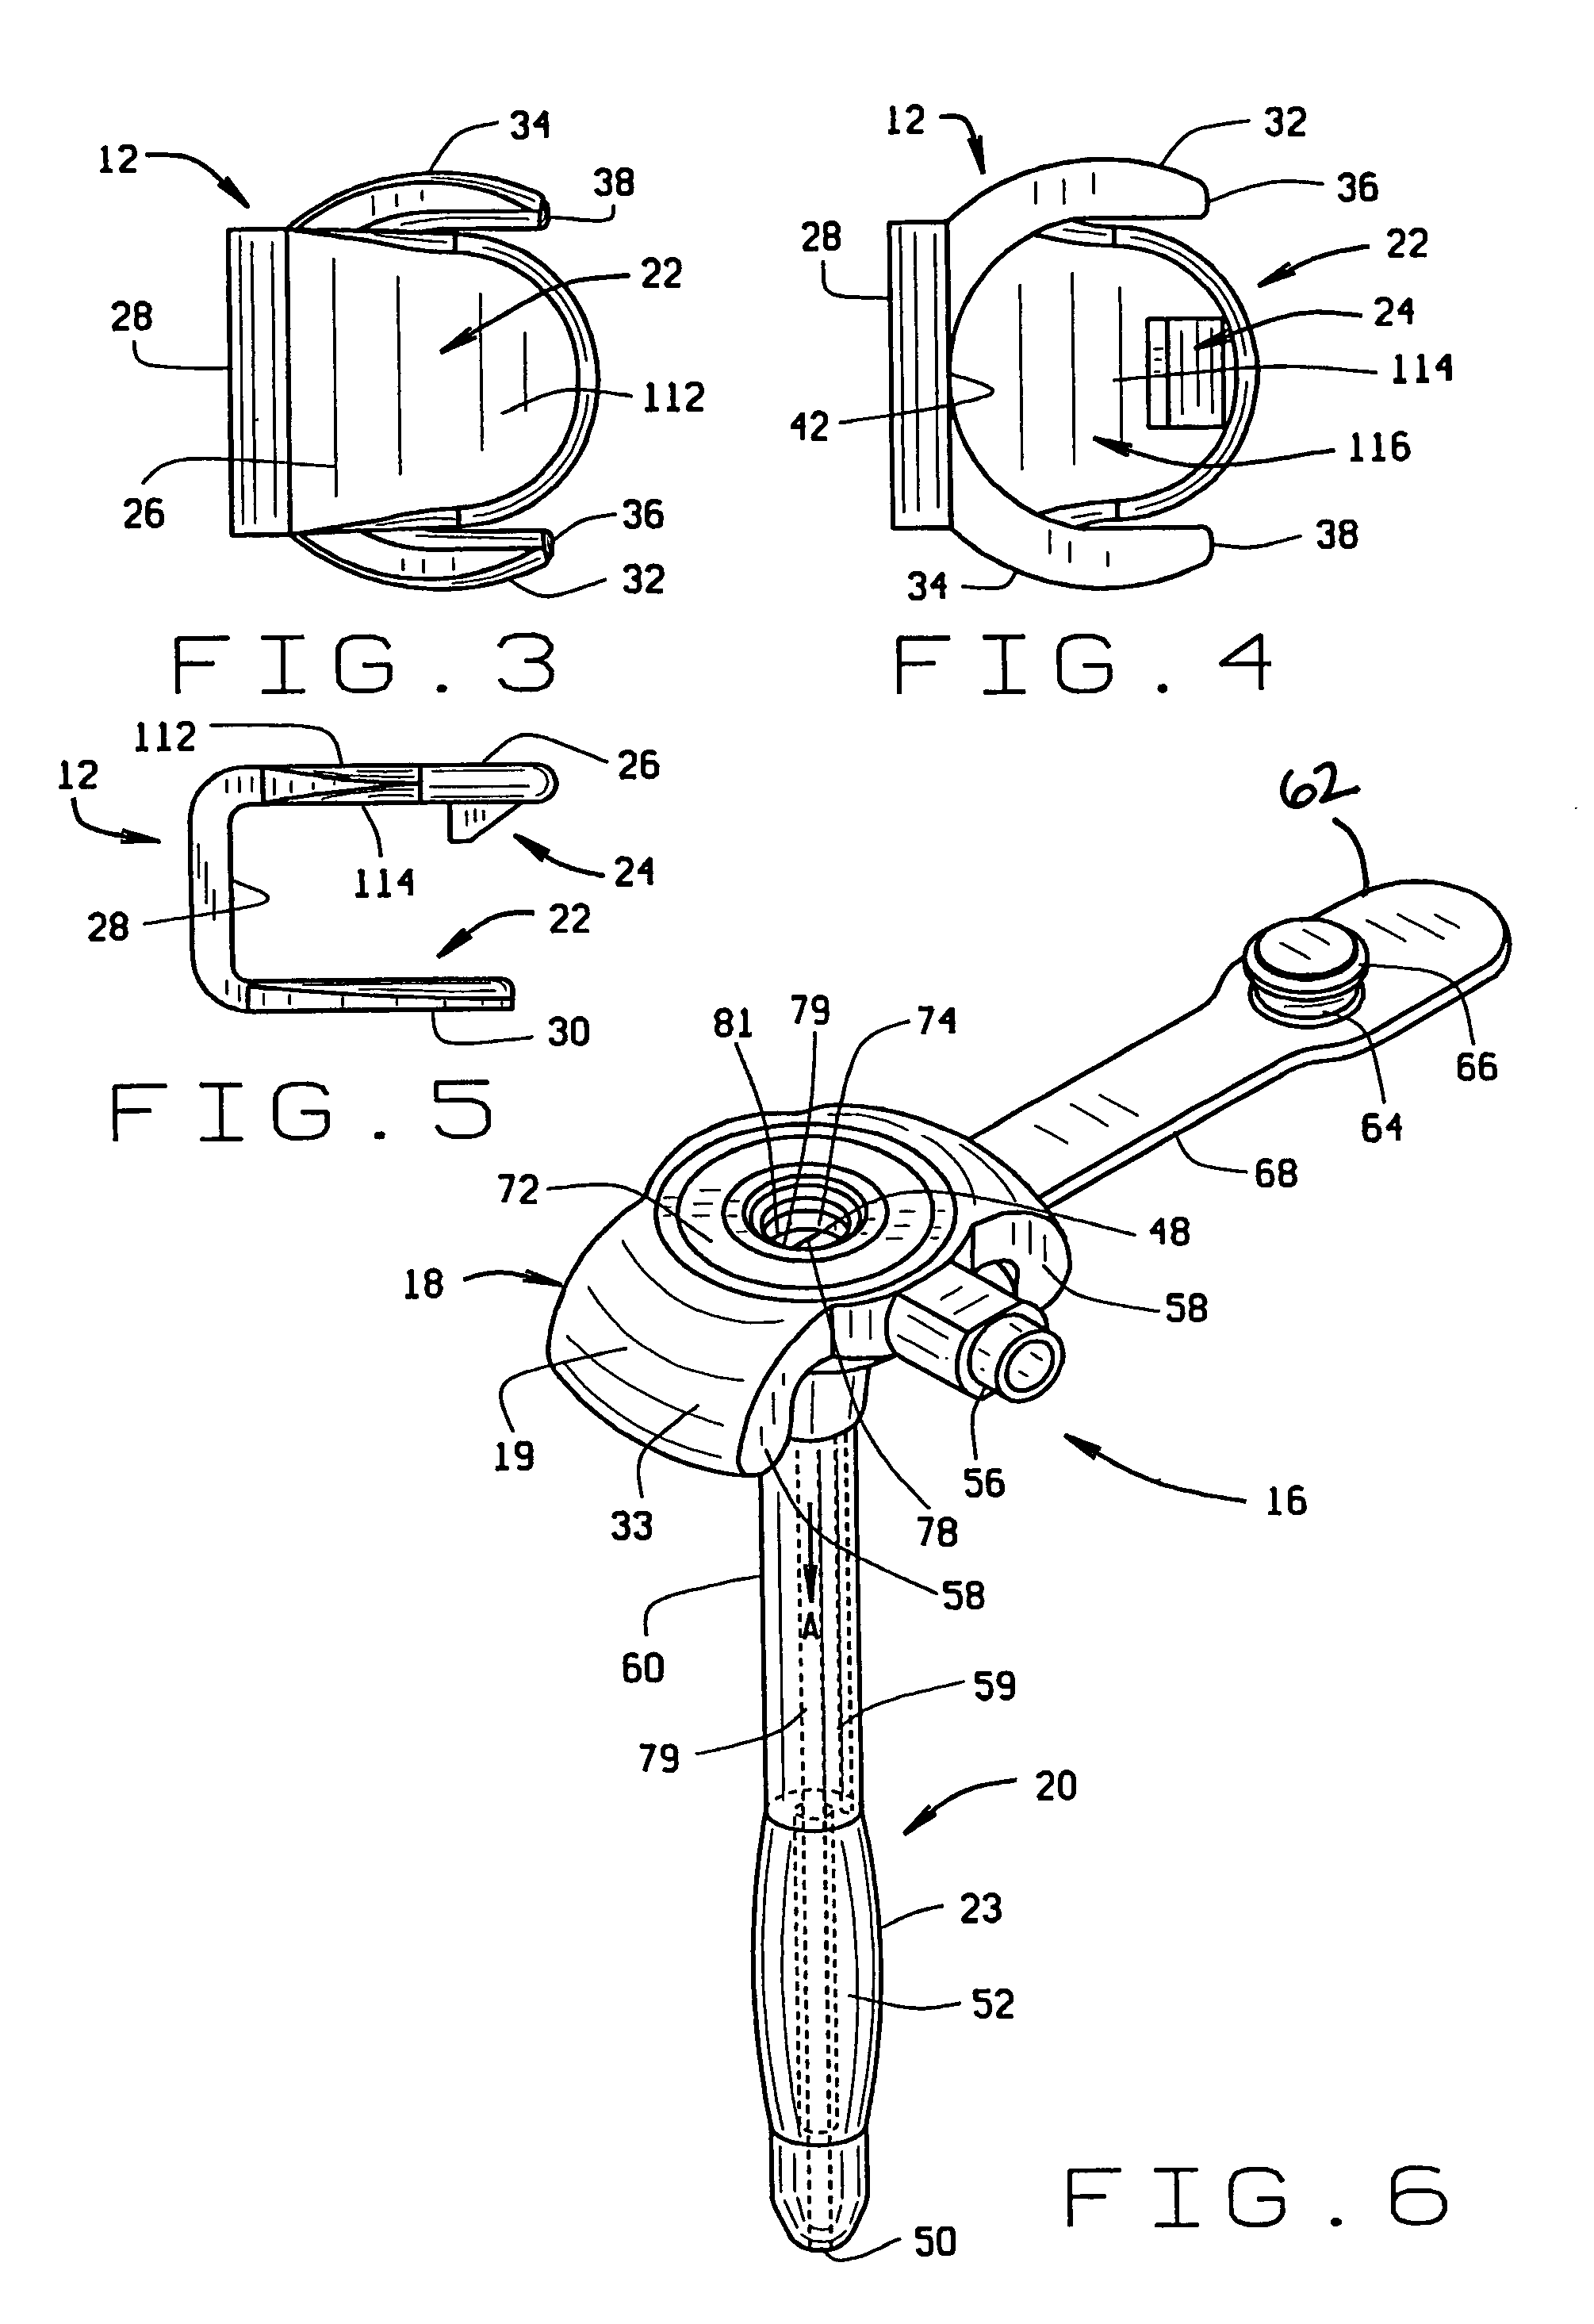 Securing device for a low profile gastrostomy tube having an inflatable balloon